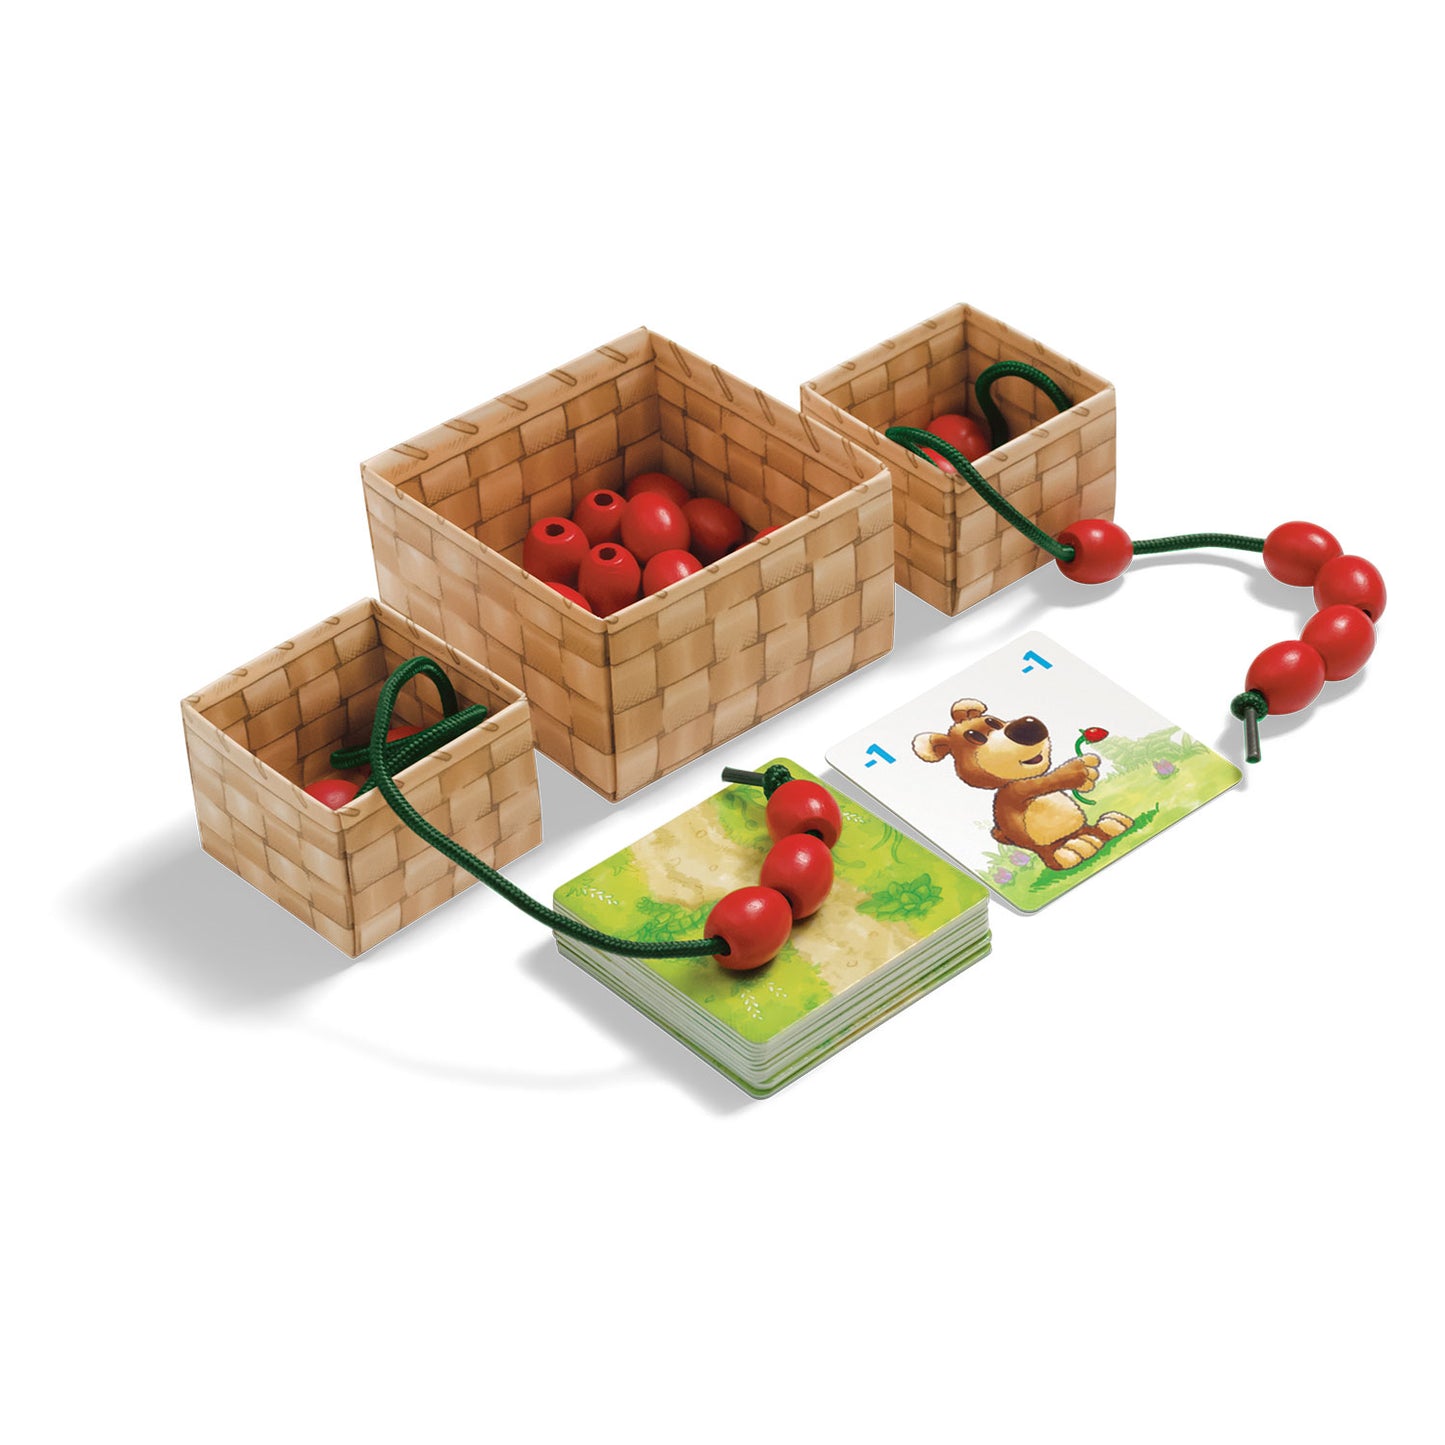 Share a Berry by SimplyFun is an early counting game and fine motor skills game for ages 3 and up.